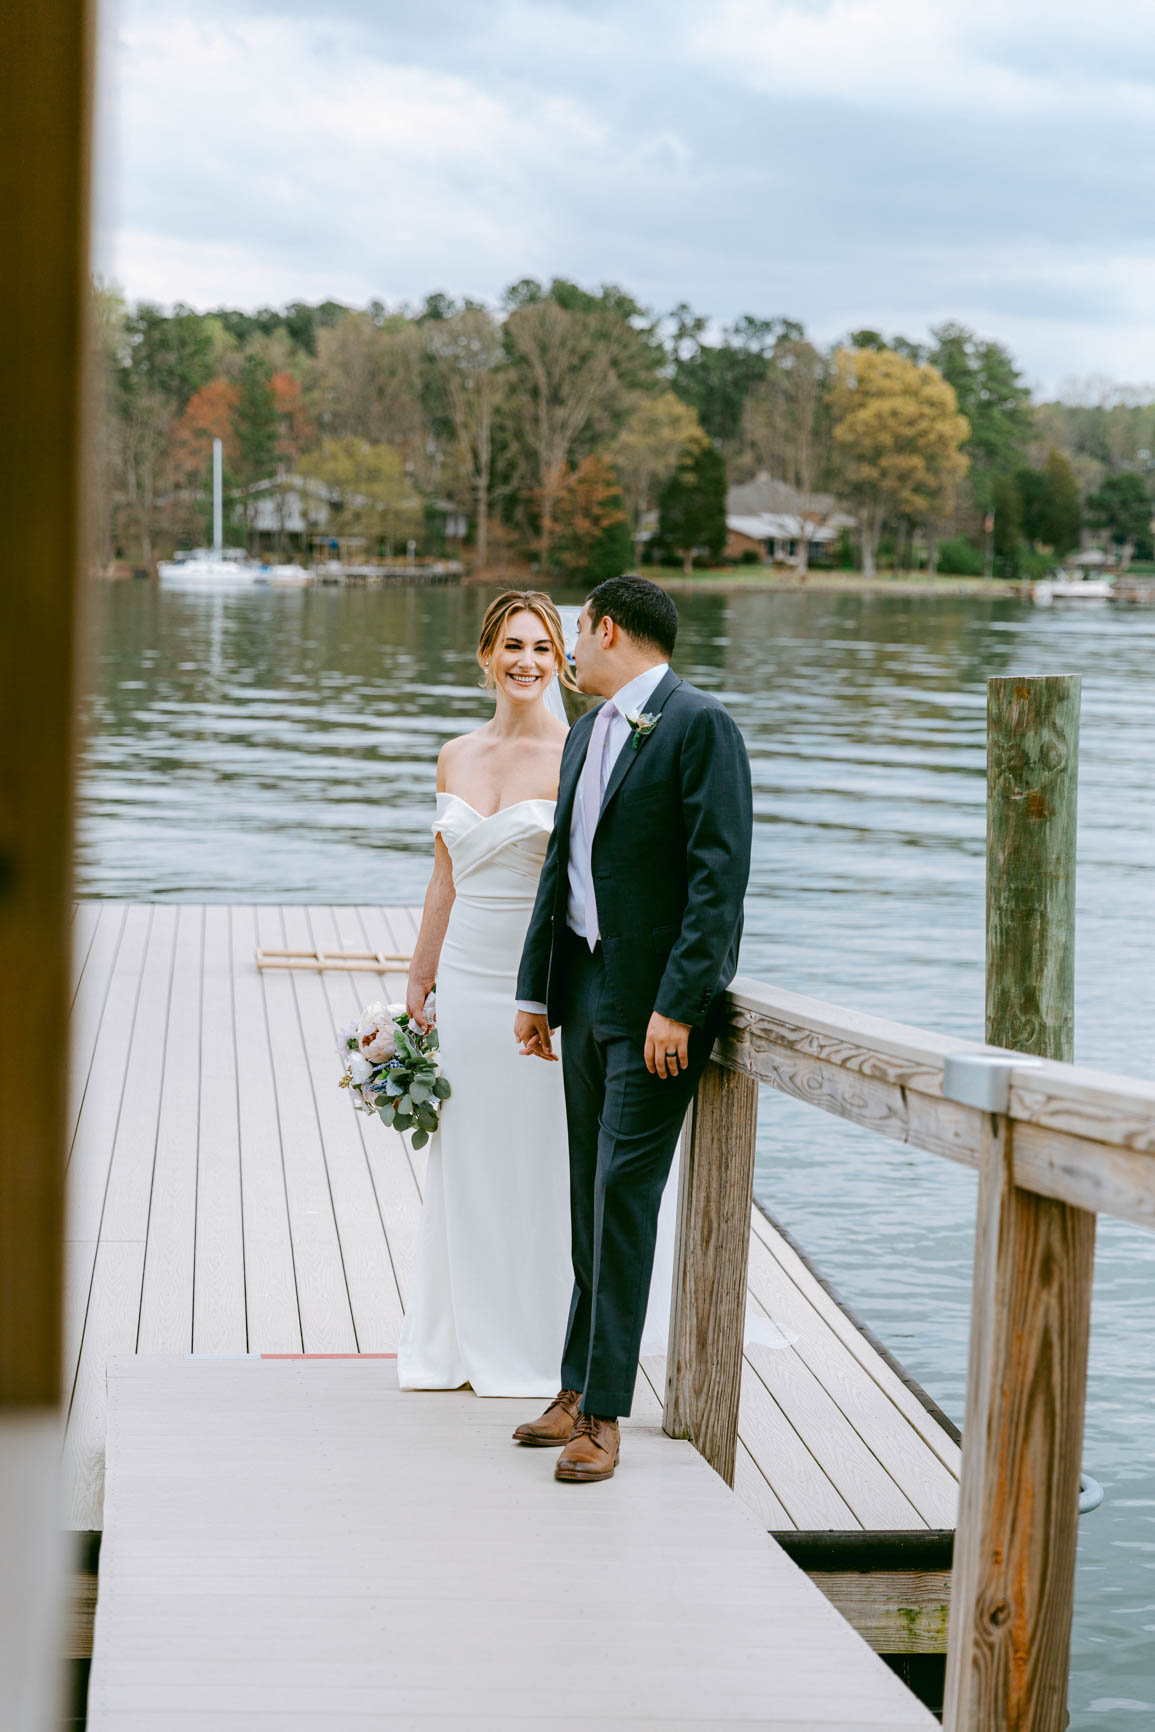 wedding portraits session in Mooresville, NC lake house shot by Nhieu Tang Photography | nhieutang.com